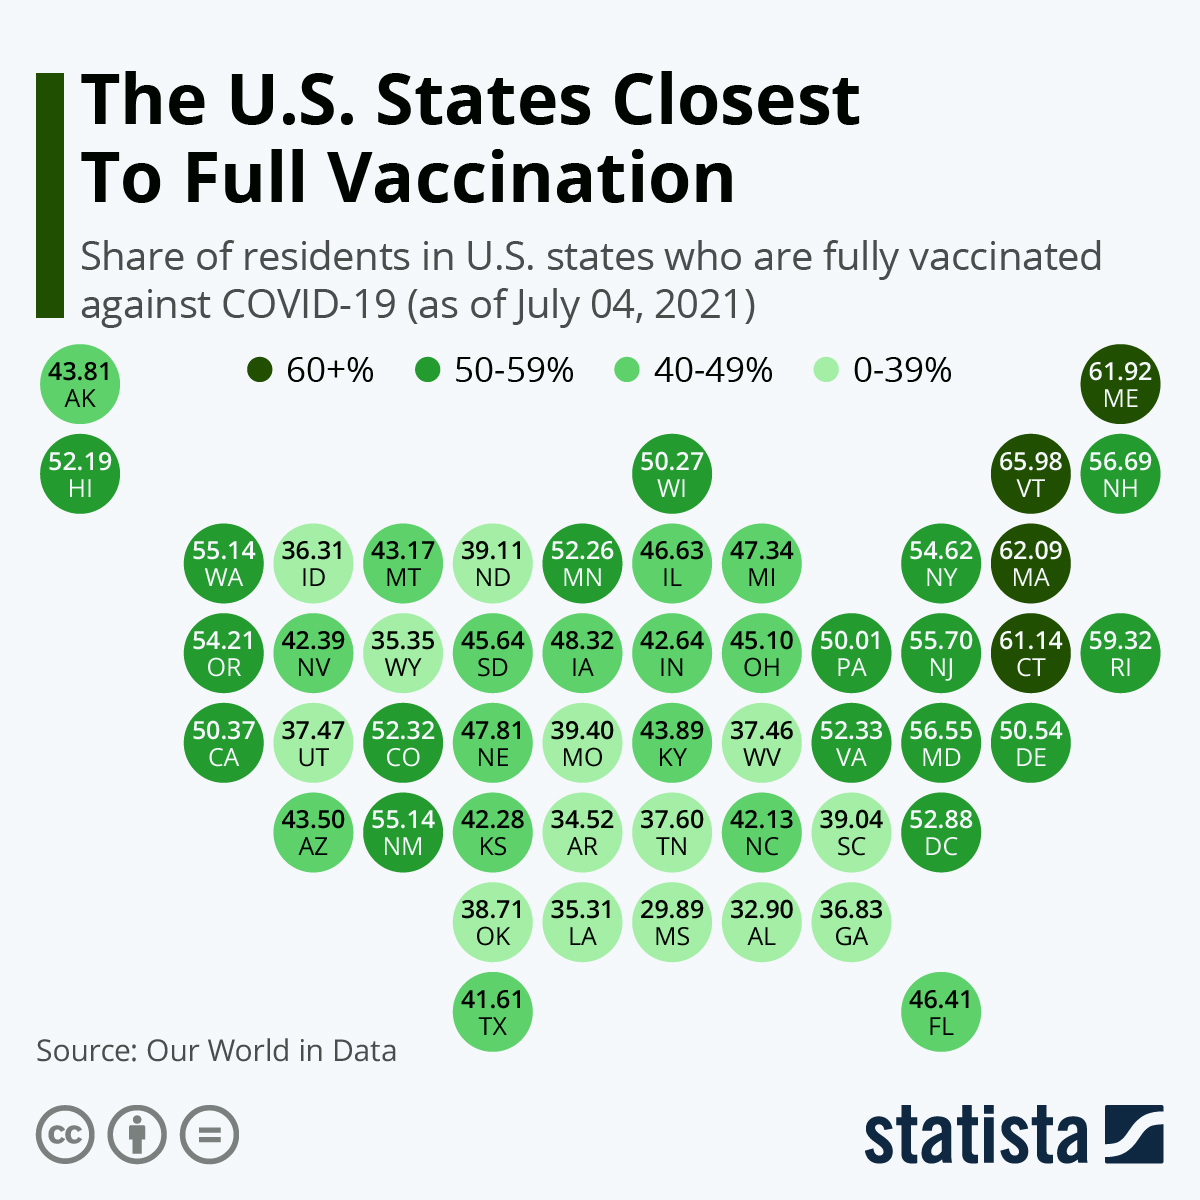 The US States Closest to Full Vaccination